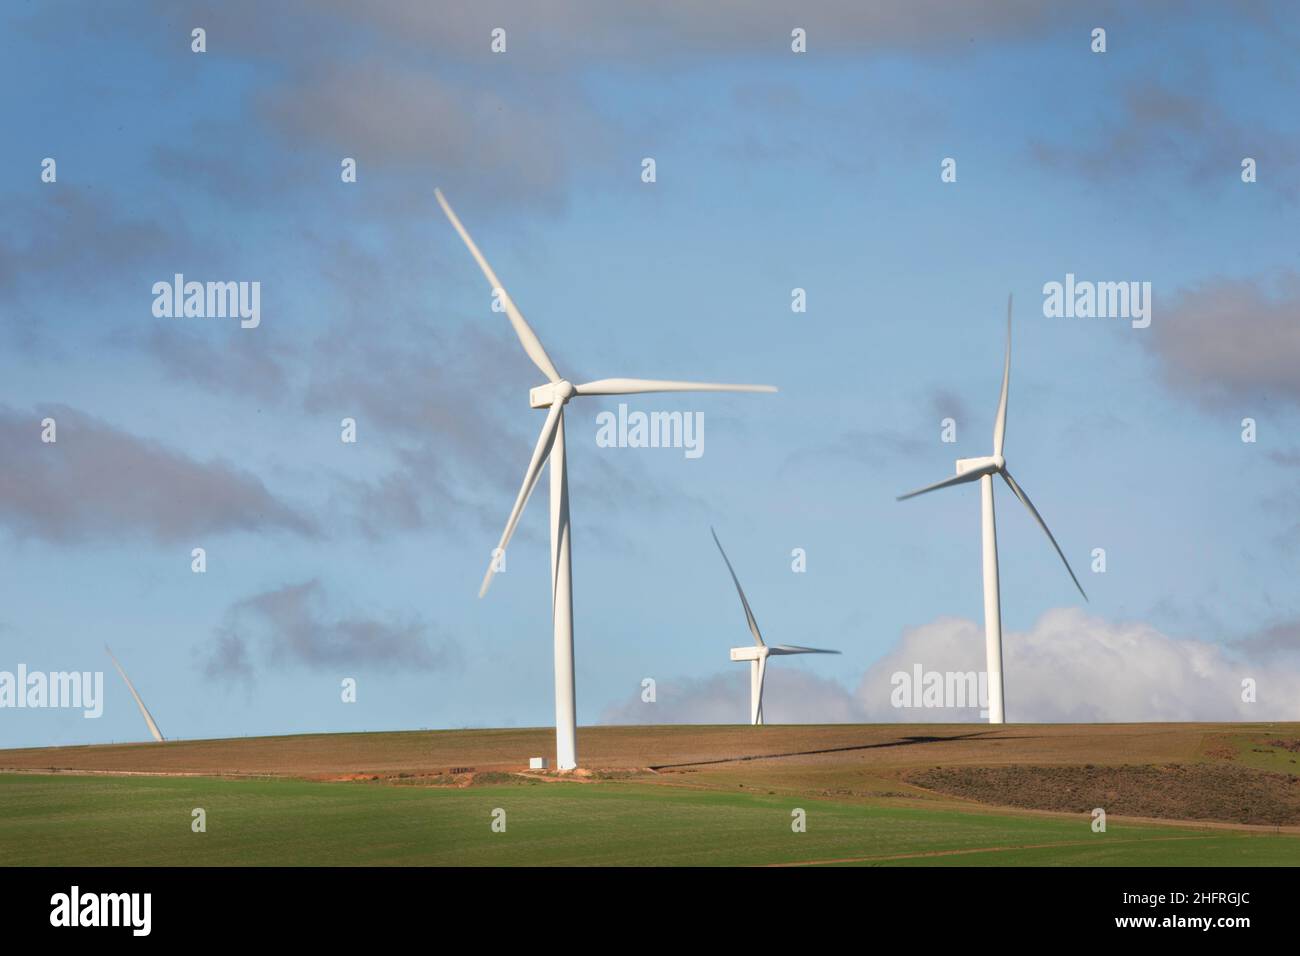 Power generating wind turbines in an agricultural field in South Africa. Stock Photo